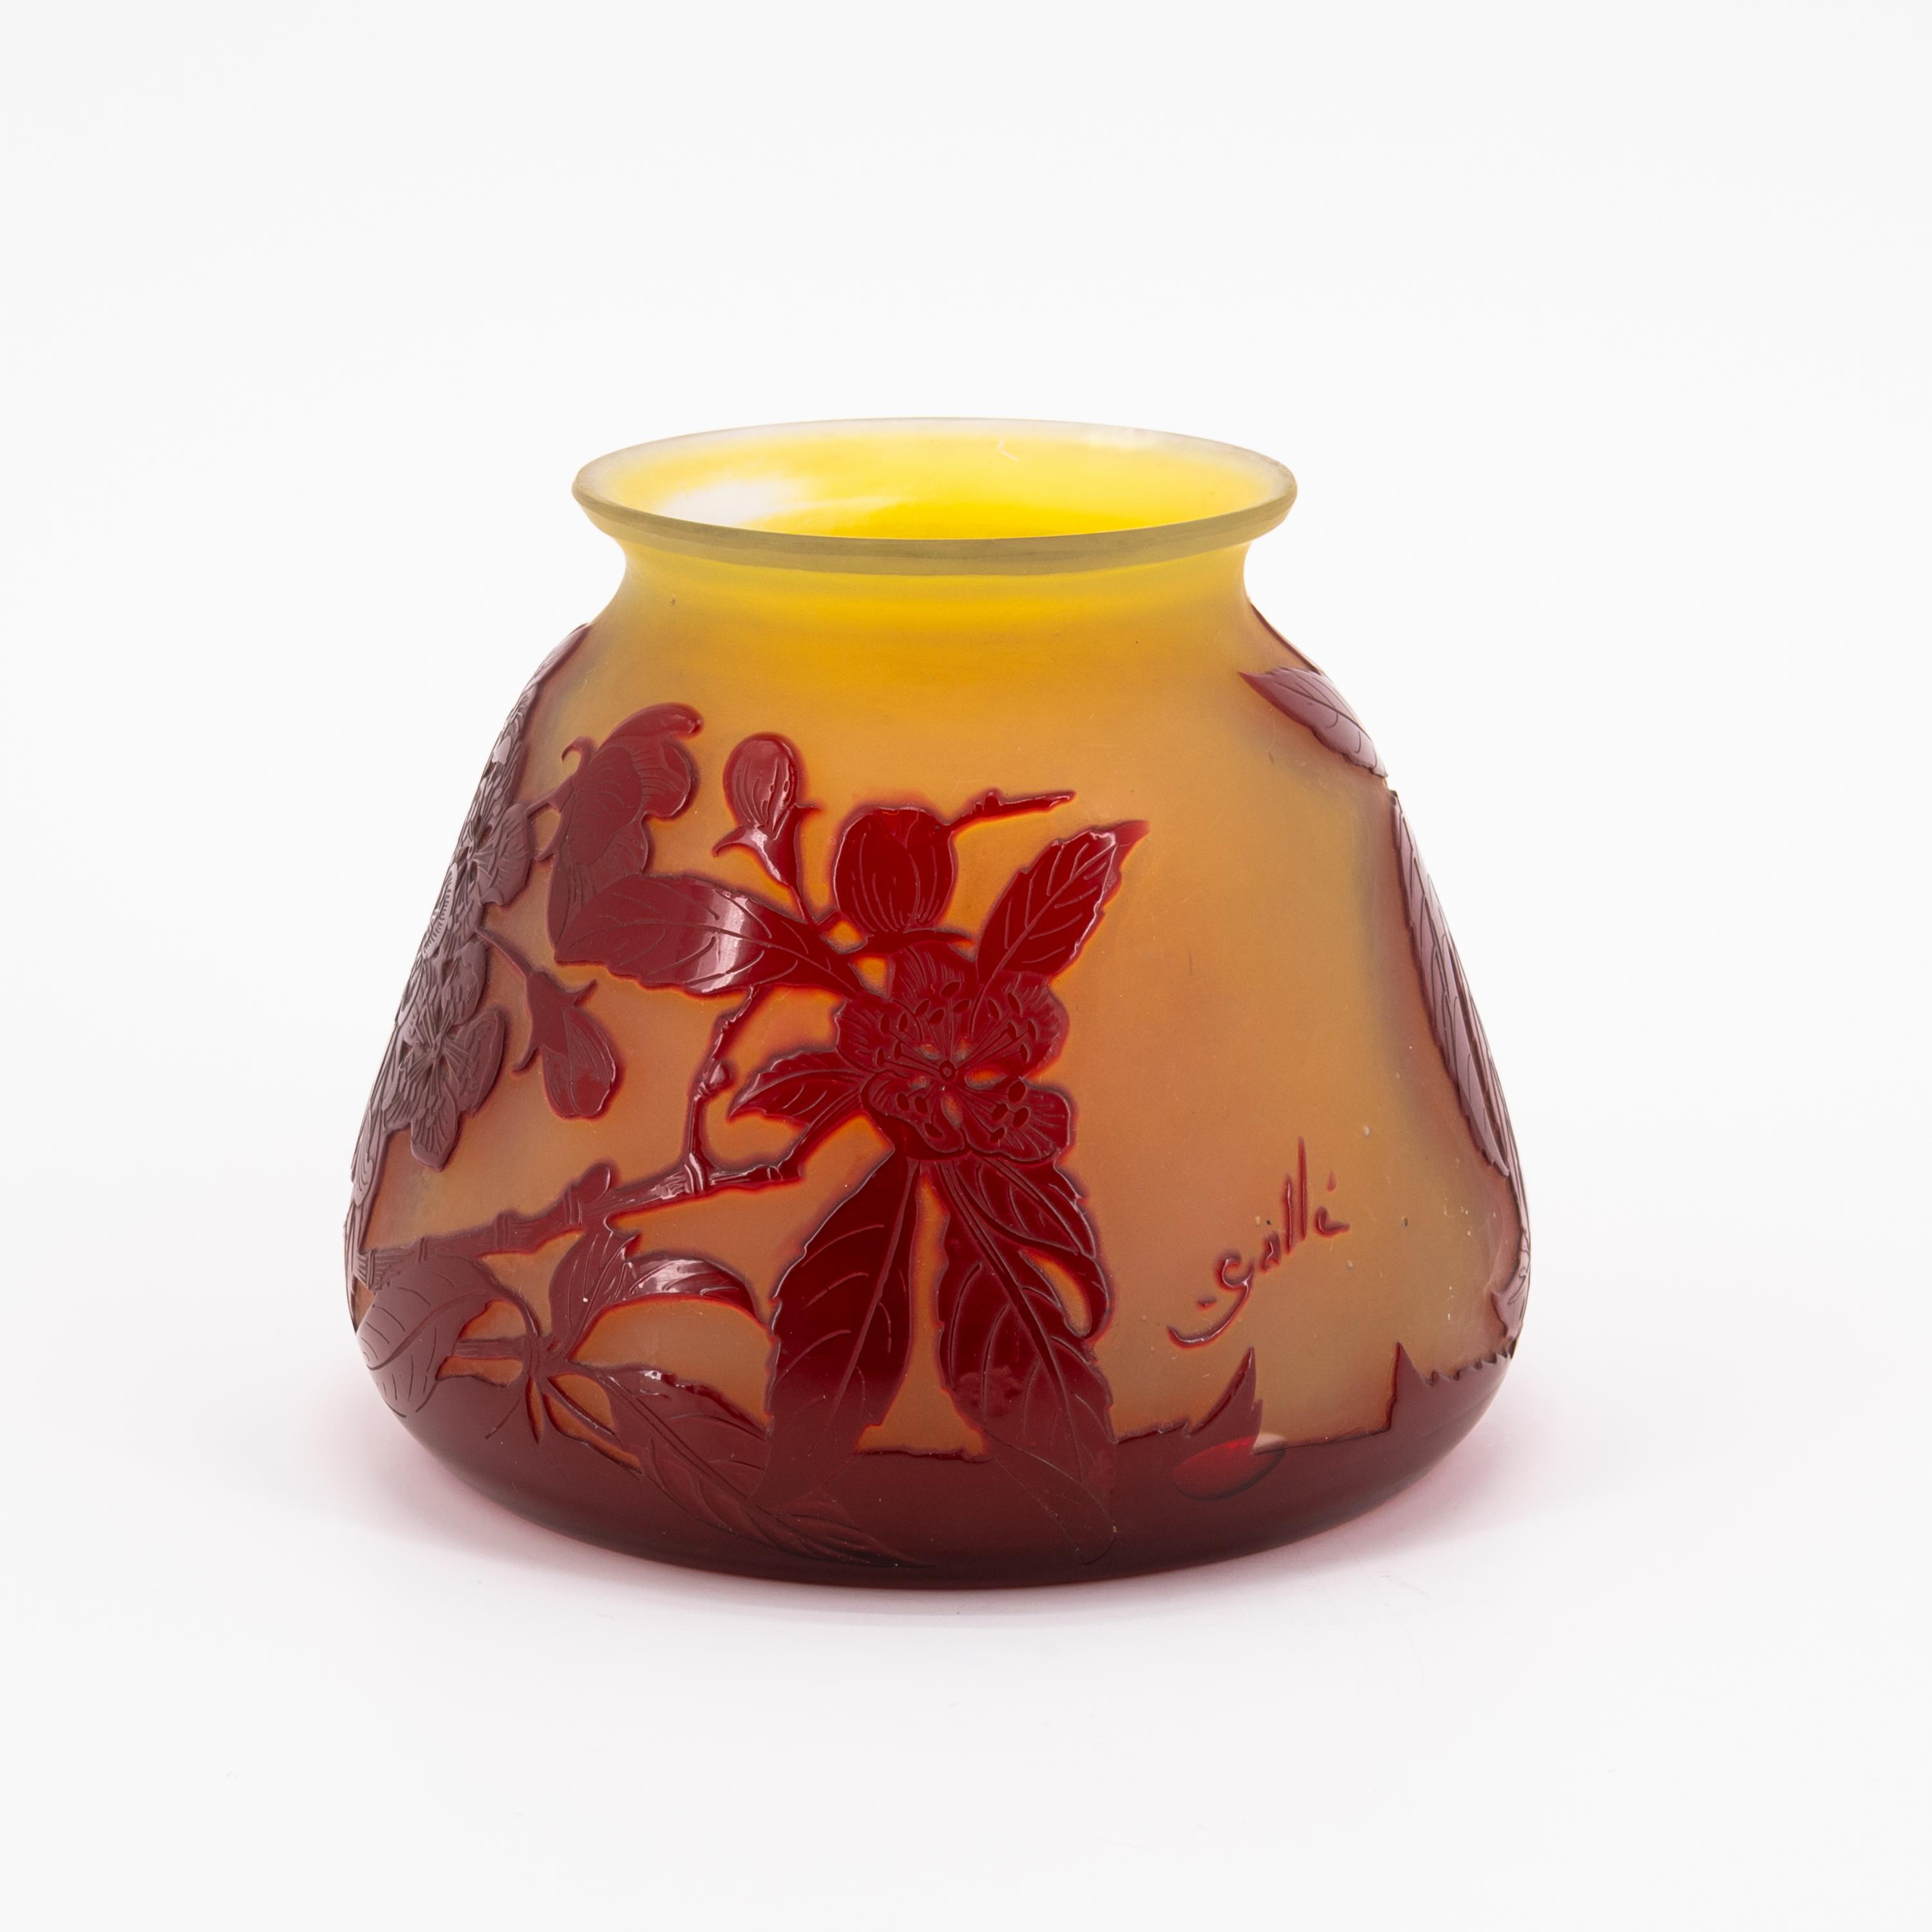 SMALL BULBOUS GLASS VASE WITH CHARRY BLOSSOM DECOR - Image 2 of 6